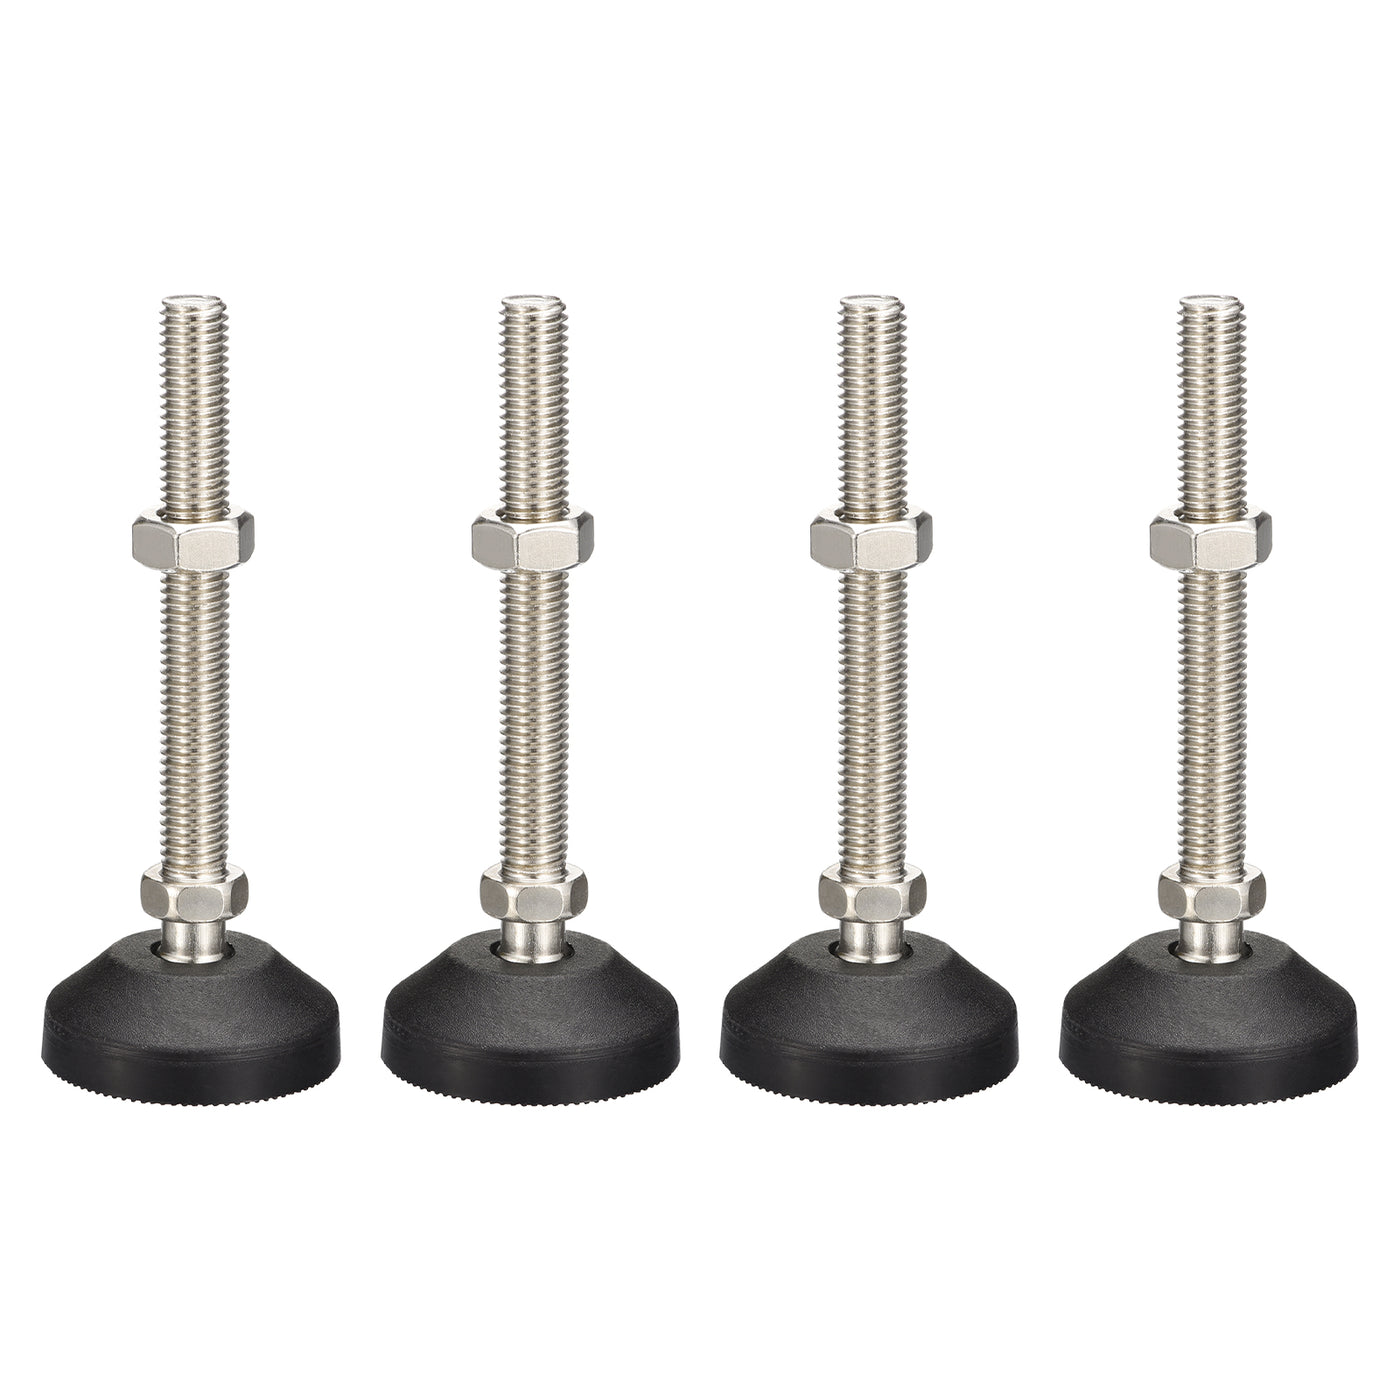 uxcell Uxcell Furniture Levelers, 4Pcs M12x100x50mm Nylon Universal Leveling Feet, Adjustable Swivel Table Feet for Furniture Workshop Machines Machinery Equipment